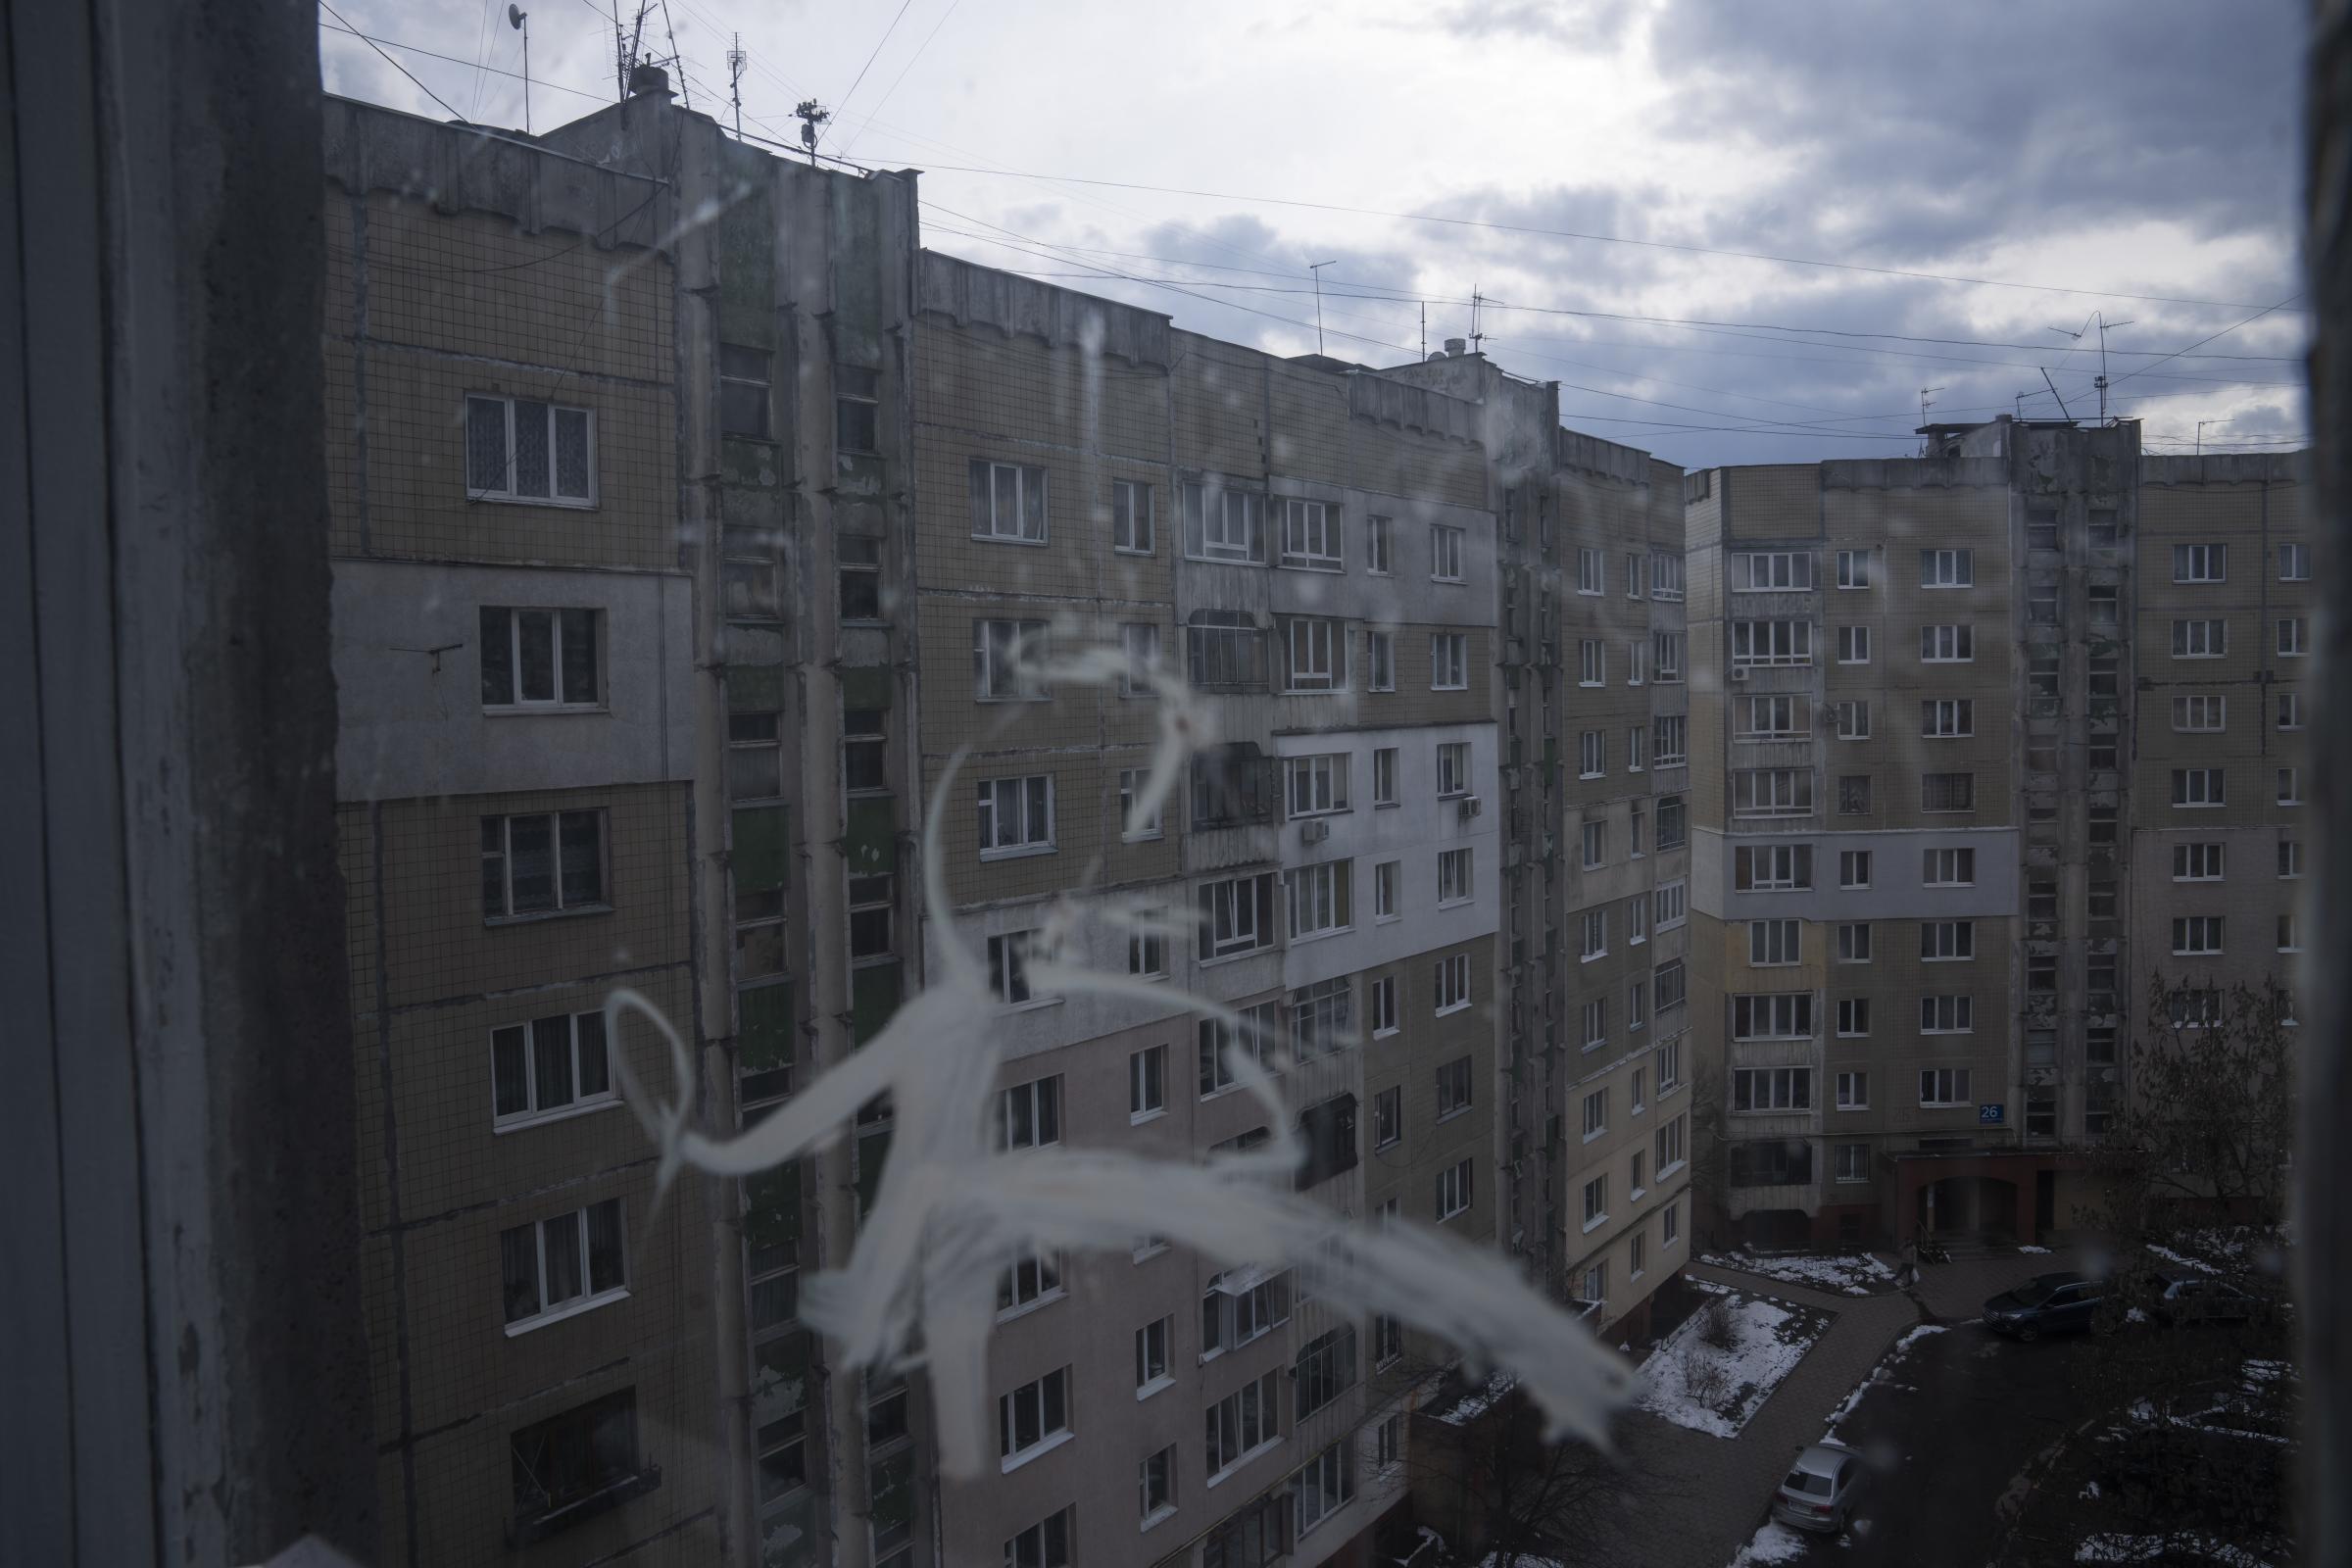 Stories of Ukraine's families during war - A general view of an apartment block seen from the...